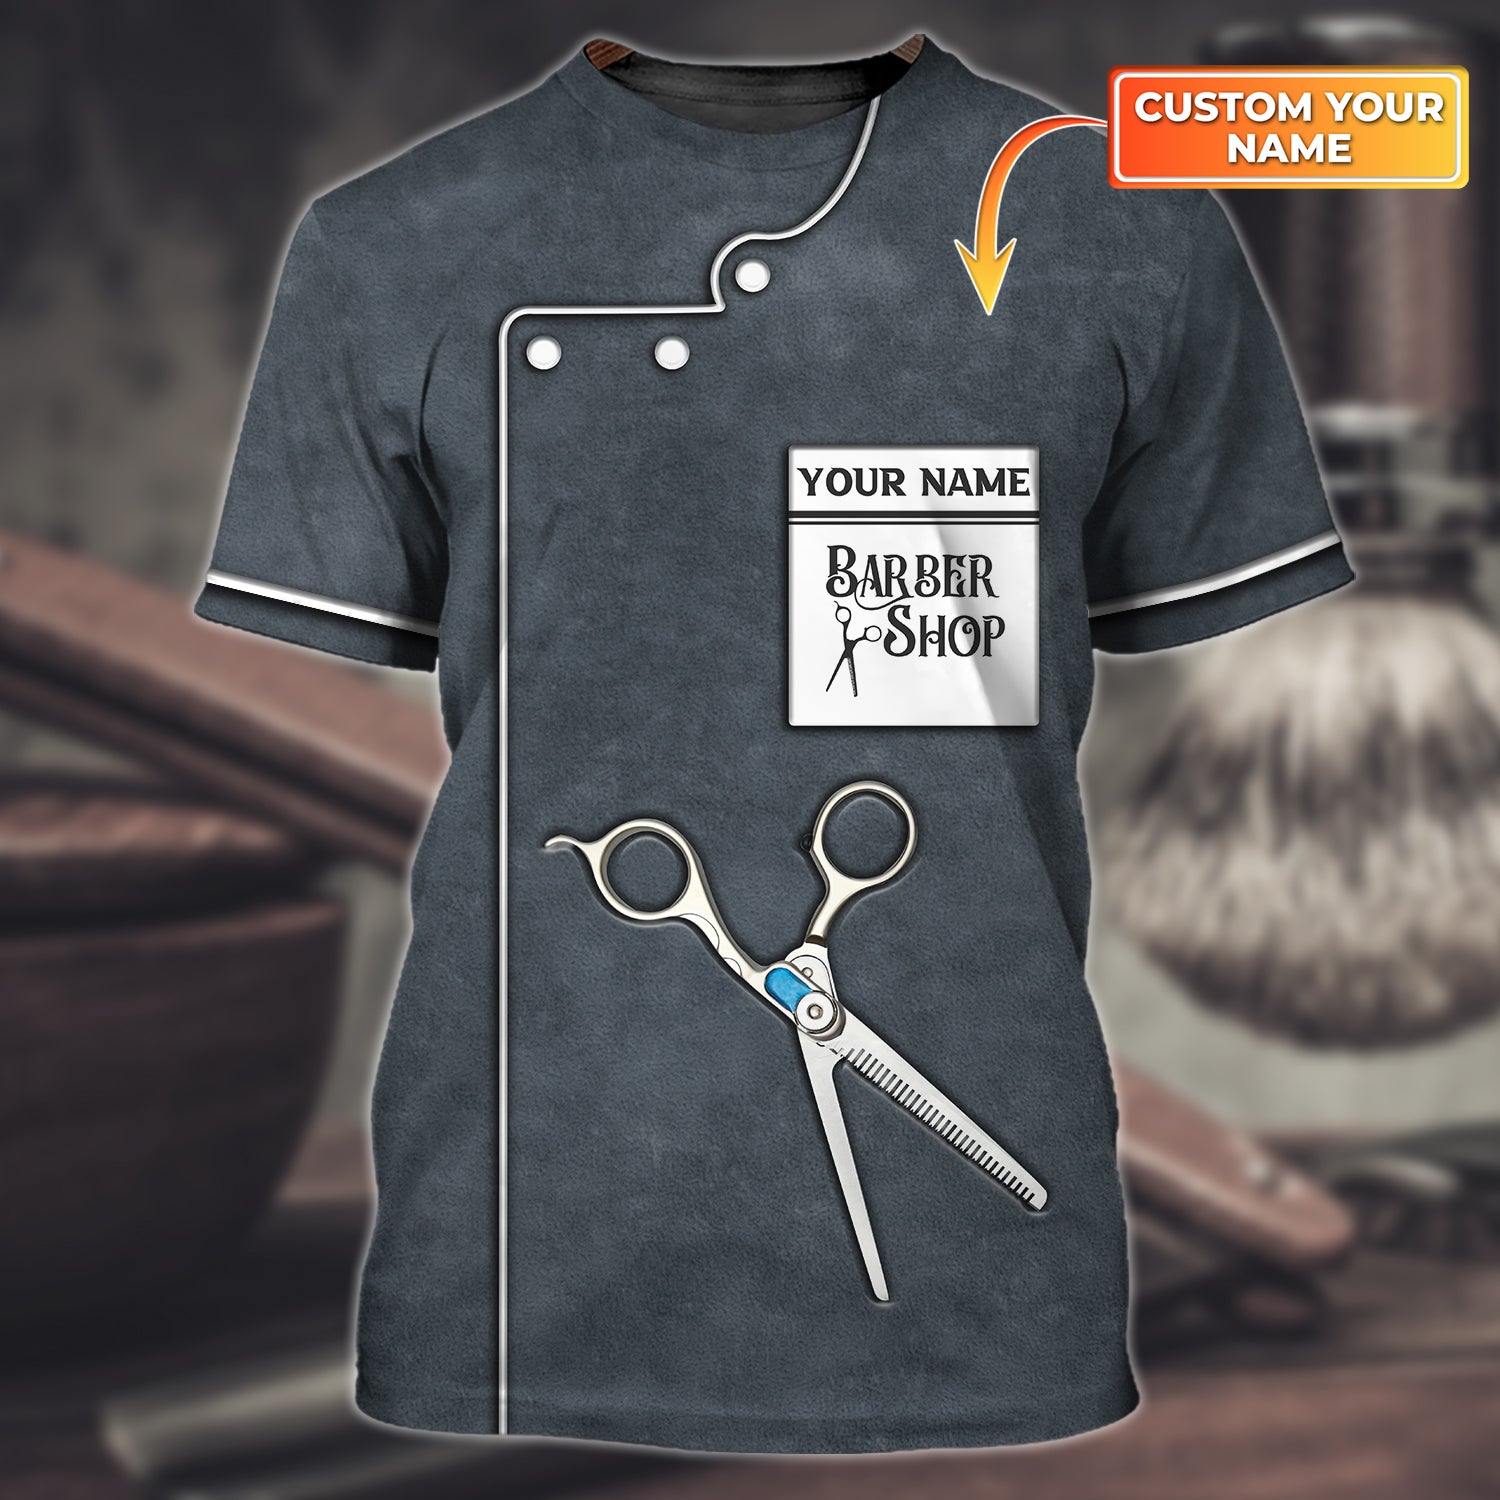 Customized Barber Shirts/ 3D All Over Printed Tshirt For Barber Shop/ Best Gift For Barber/ Barber Shirt For Him Her